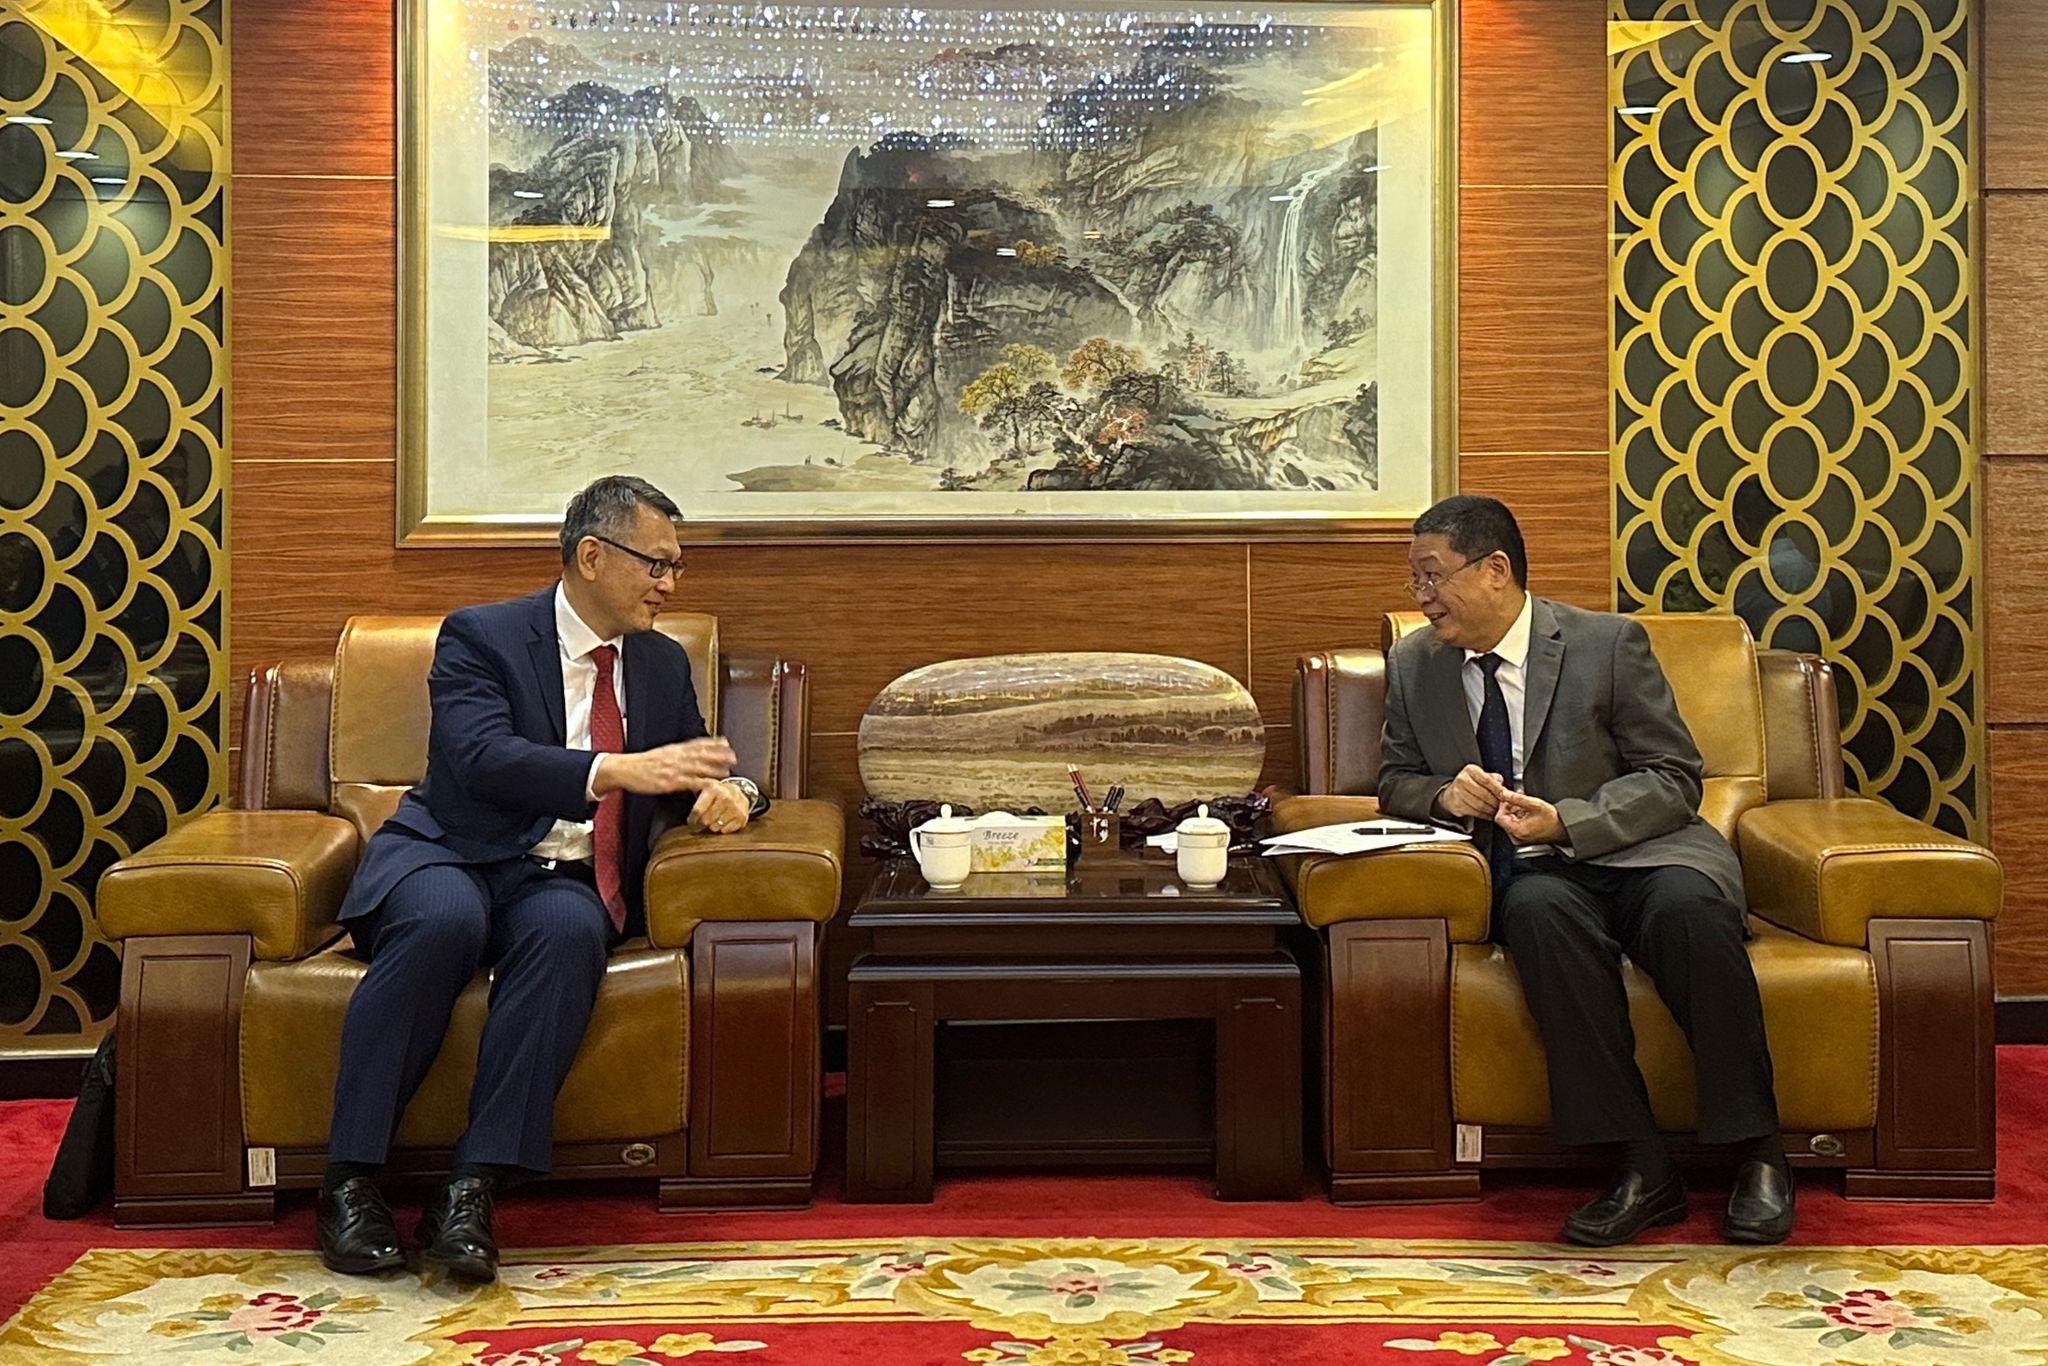 The Director-General of Civil Aviation, Mr Victor Liu (left), meets with the Director-General of the Central and Southern Regional Administration of the Civil Aviation Administration of China, Mr Ma Bing (right), during his visit to Guangzhou on May 10 and 11. 